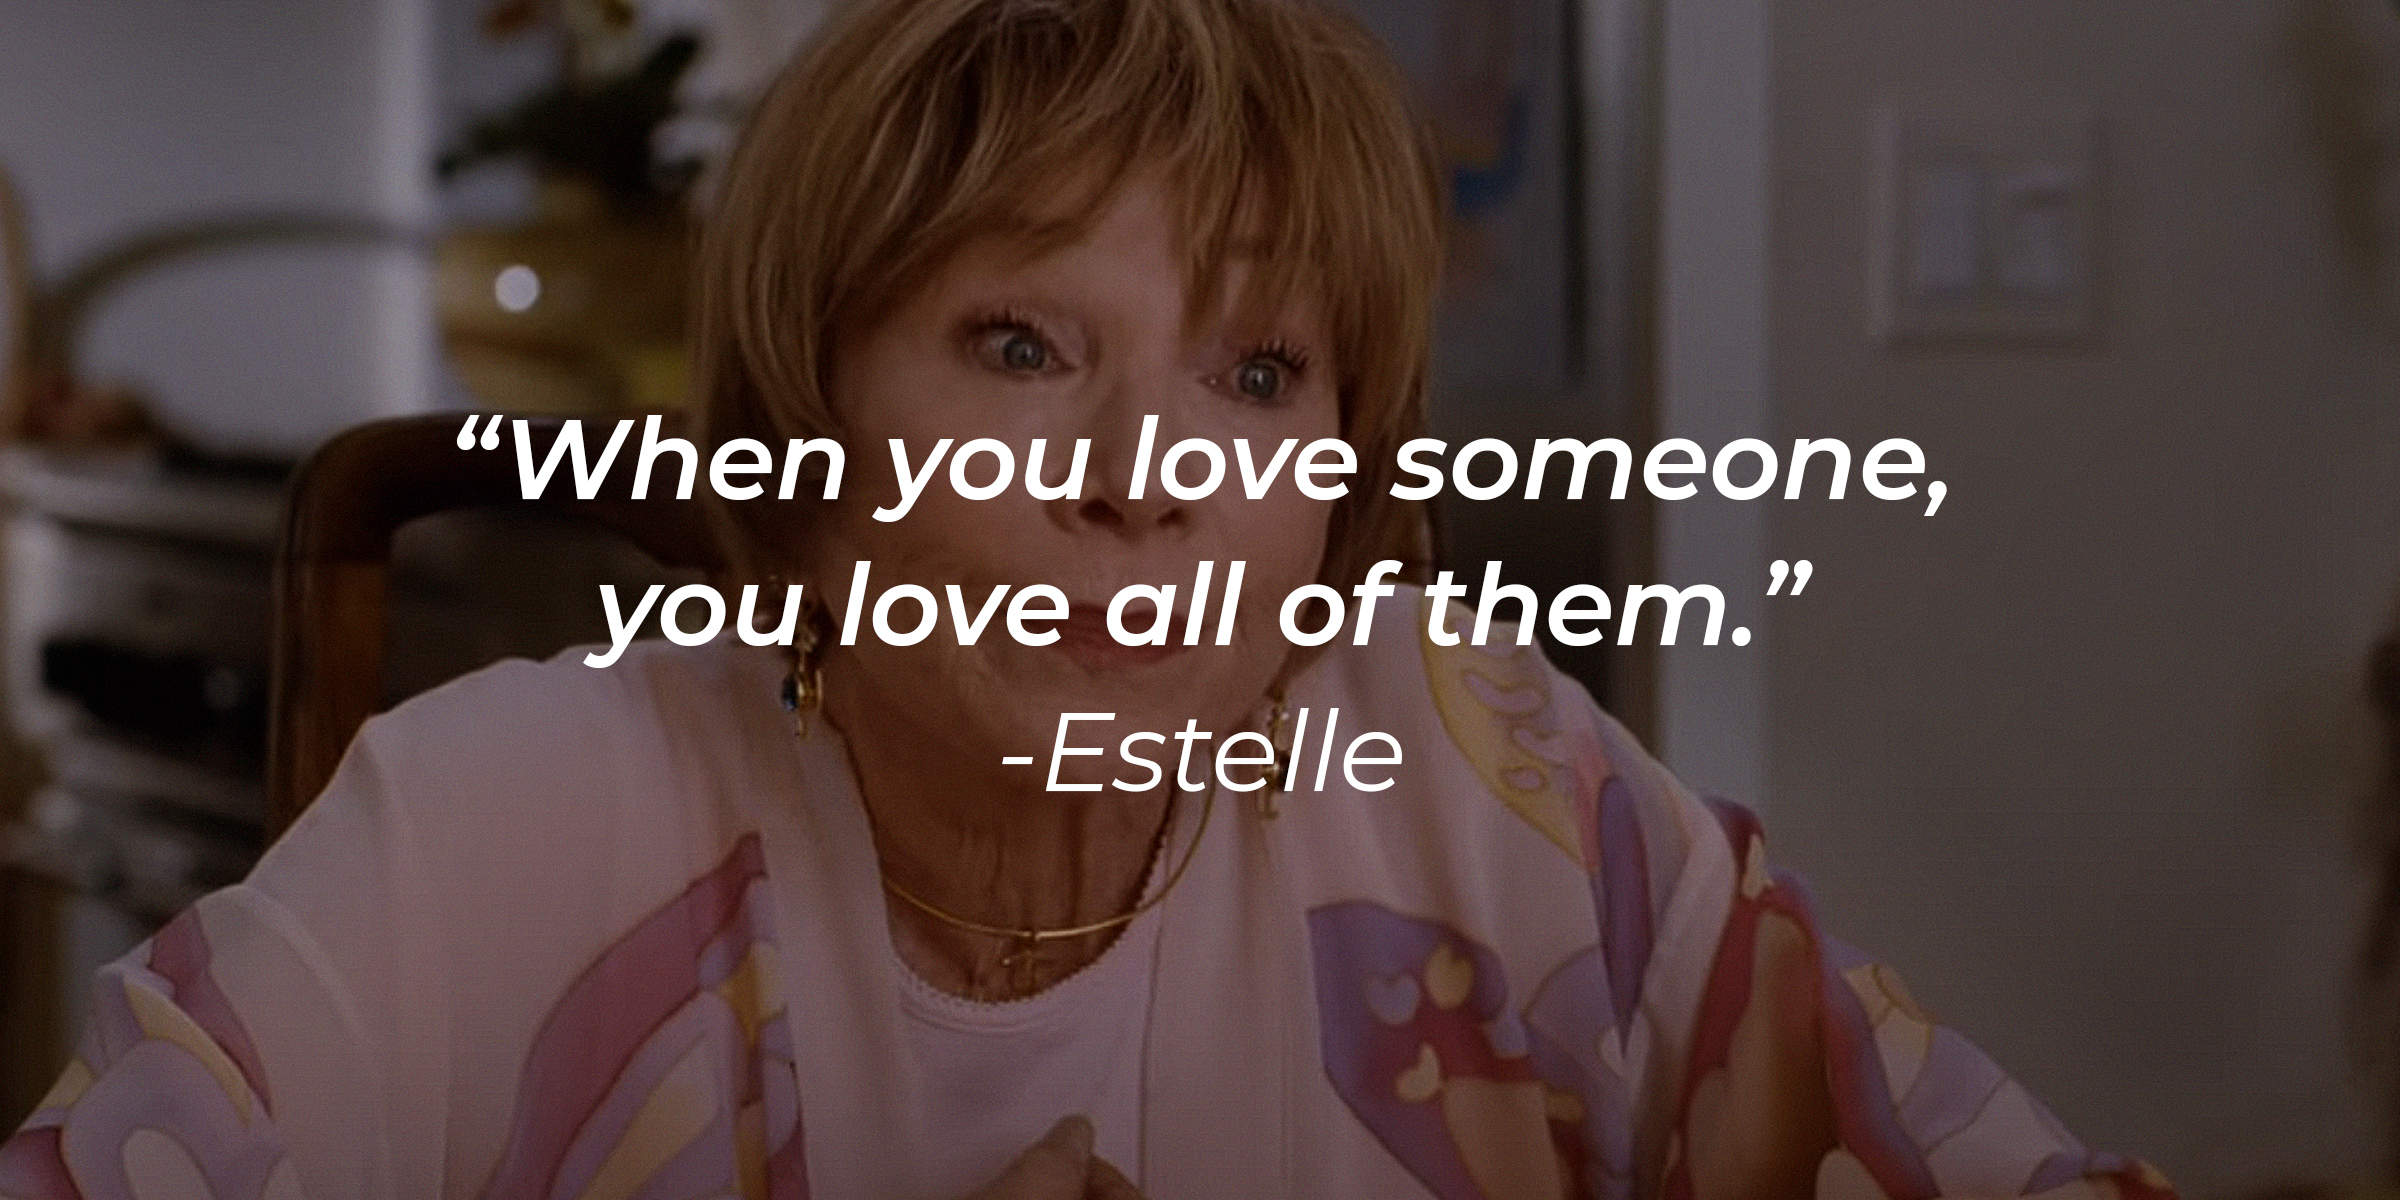 Estelle's quote: "When you love someone, you love all of them" | Source: Youtube.com/WarnerBrosPictures